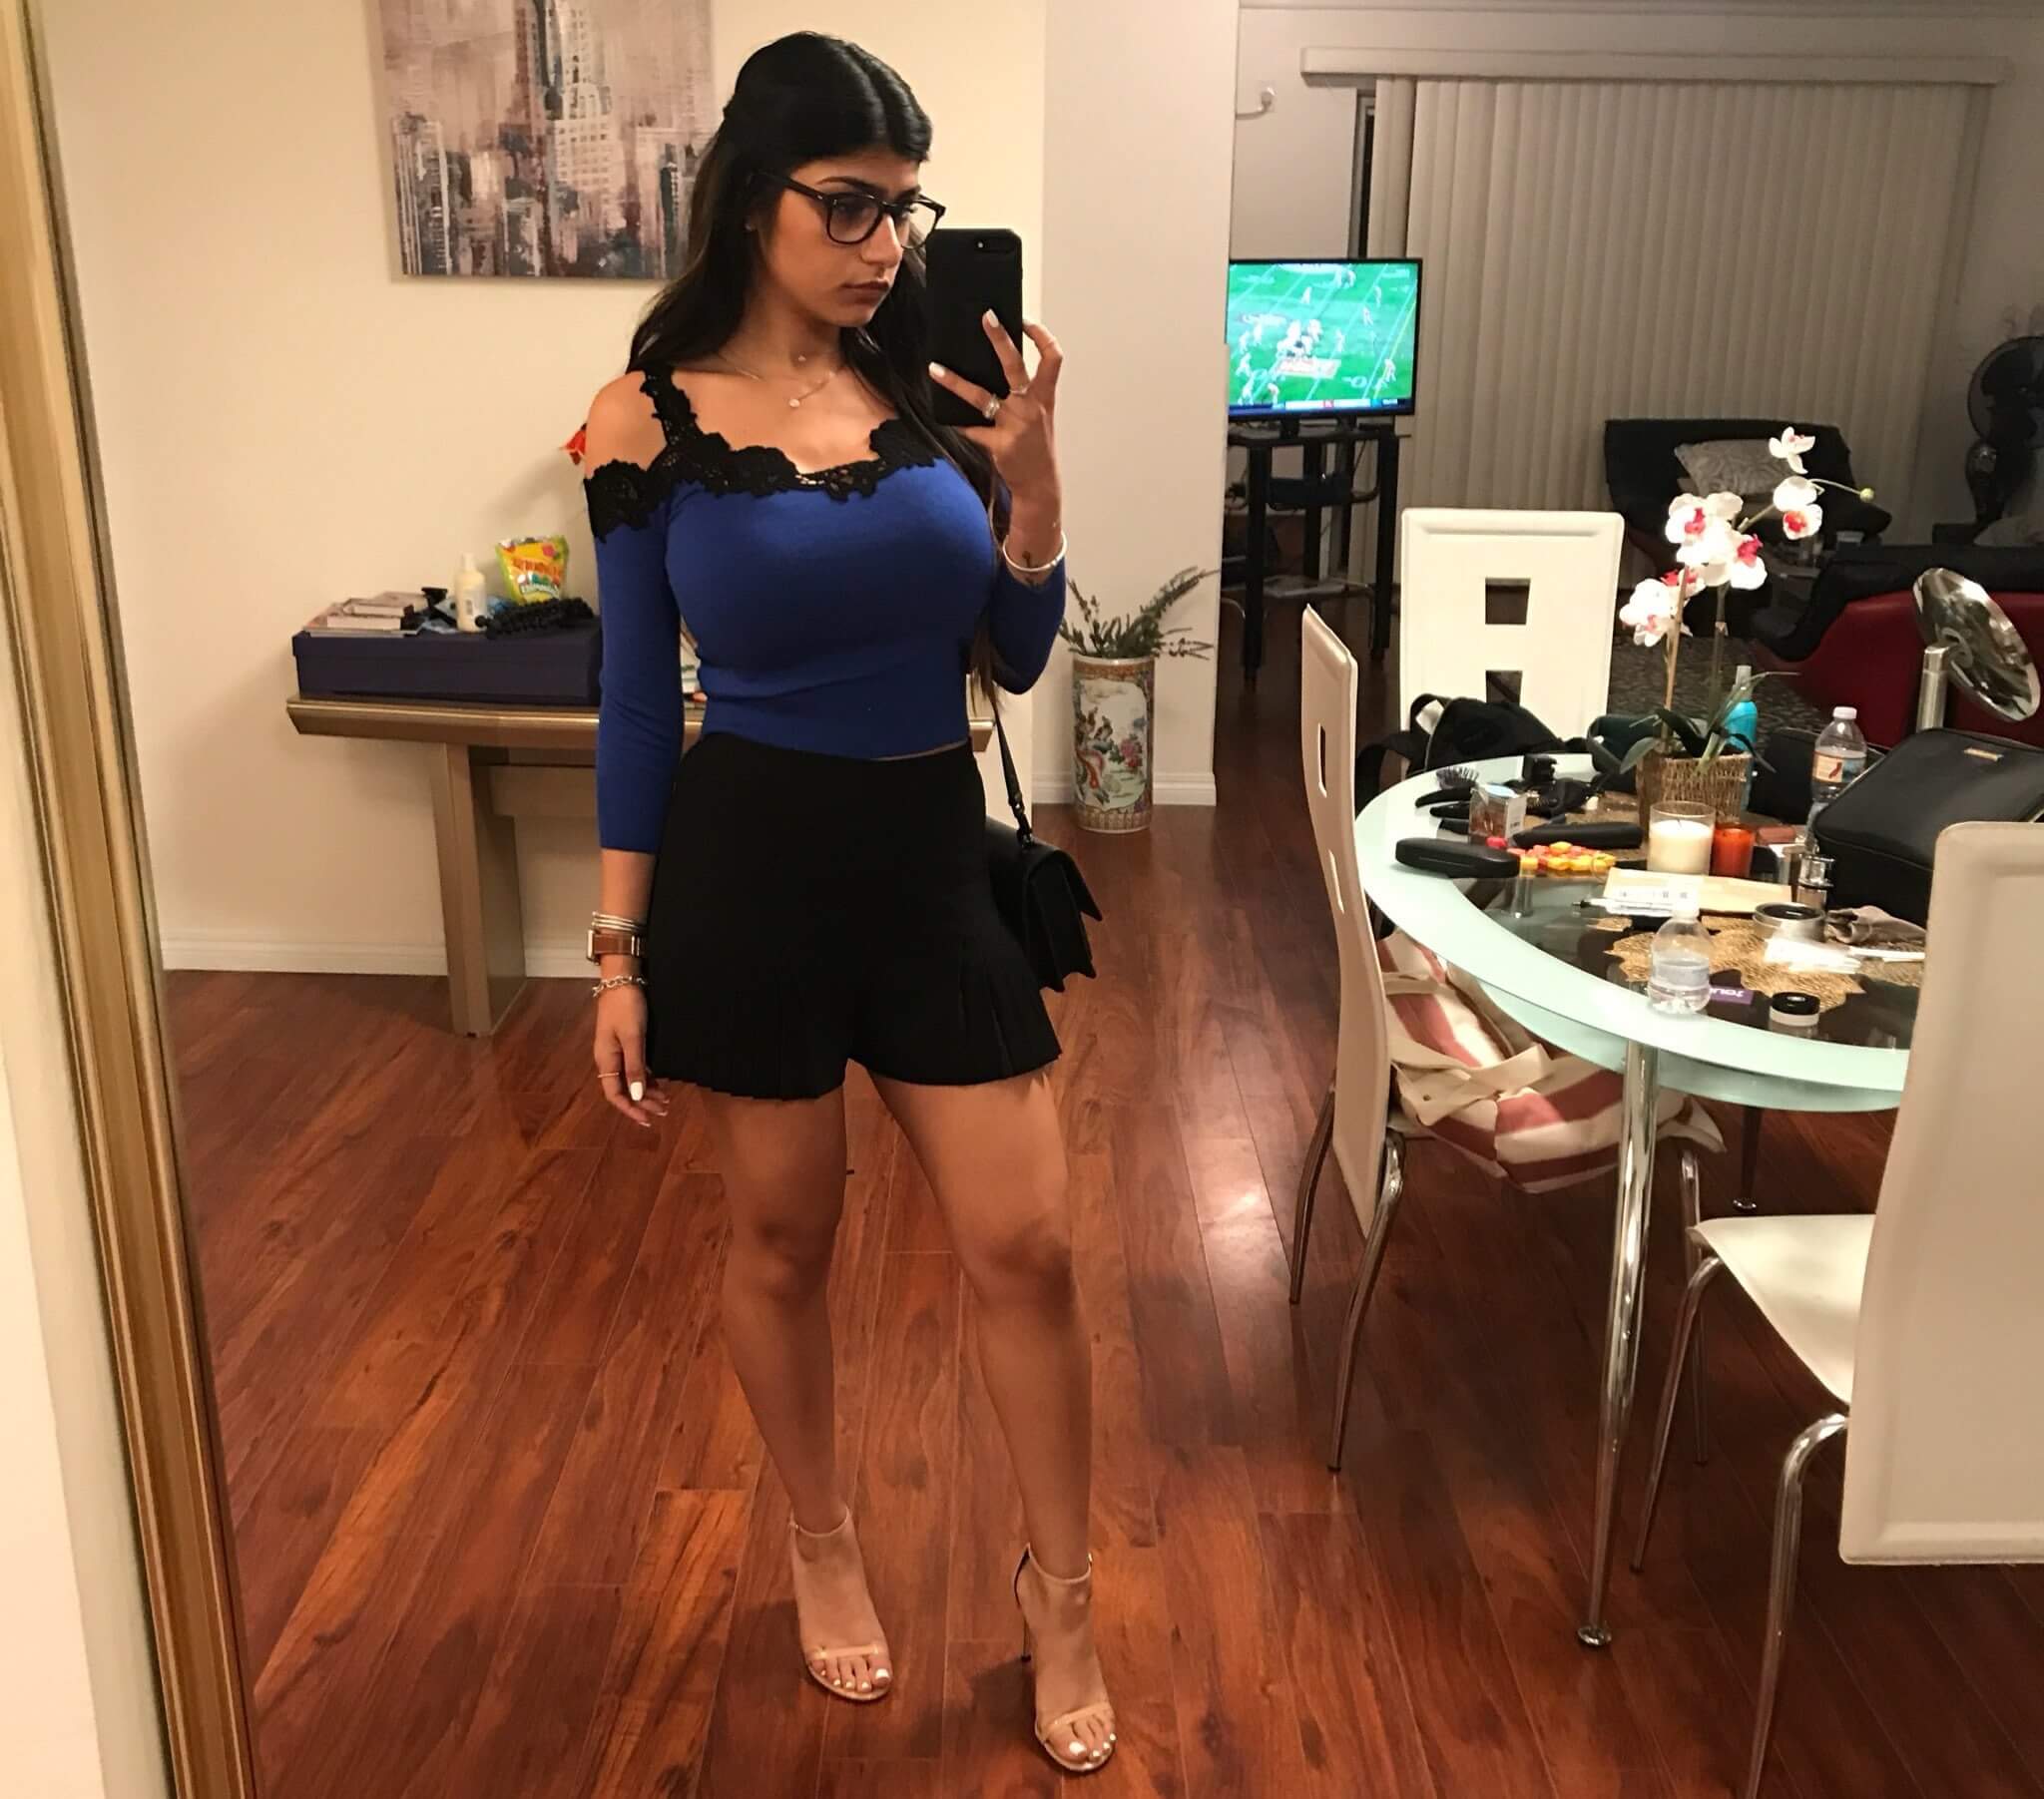 Yes, she is a very sexy actress and Mia Khalifa’s bra and... 